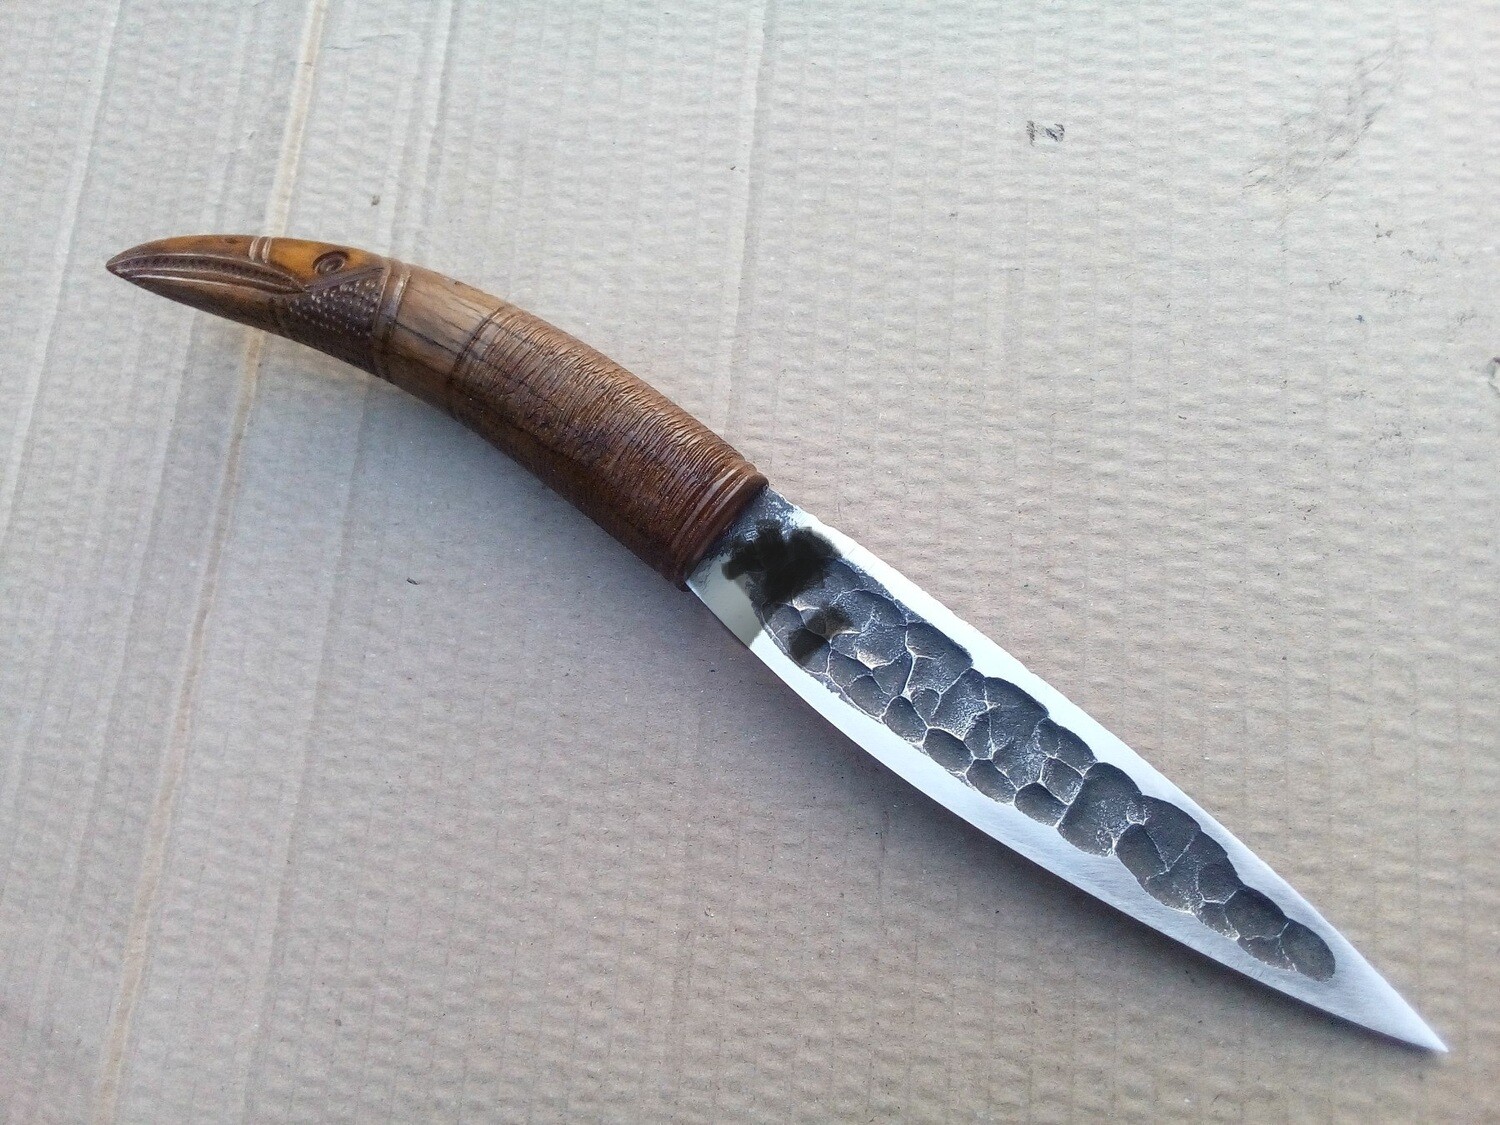 North / Yakut shape Knife with Dragon Pattern, Handforged, Antlers Carved Handle